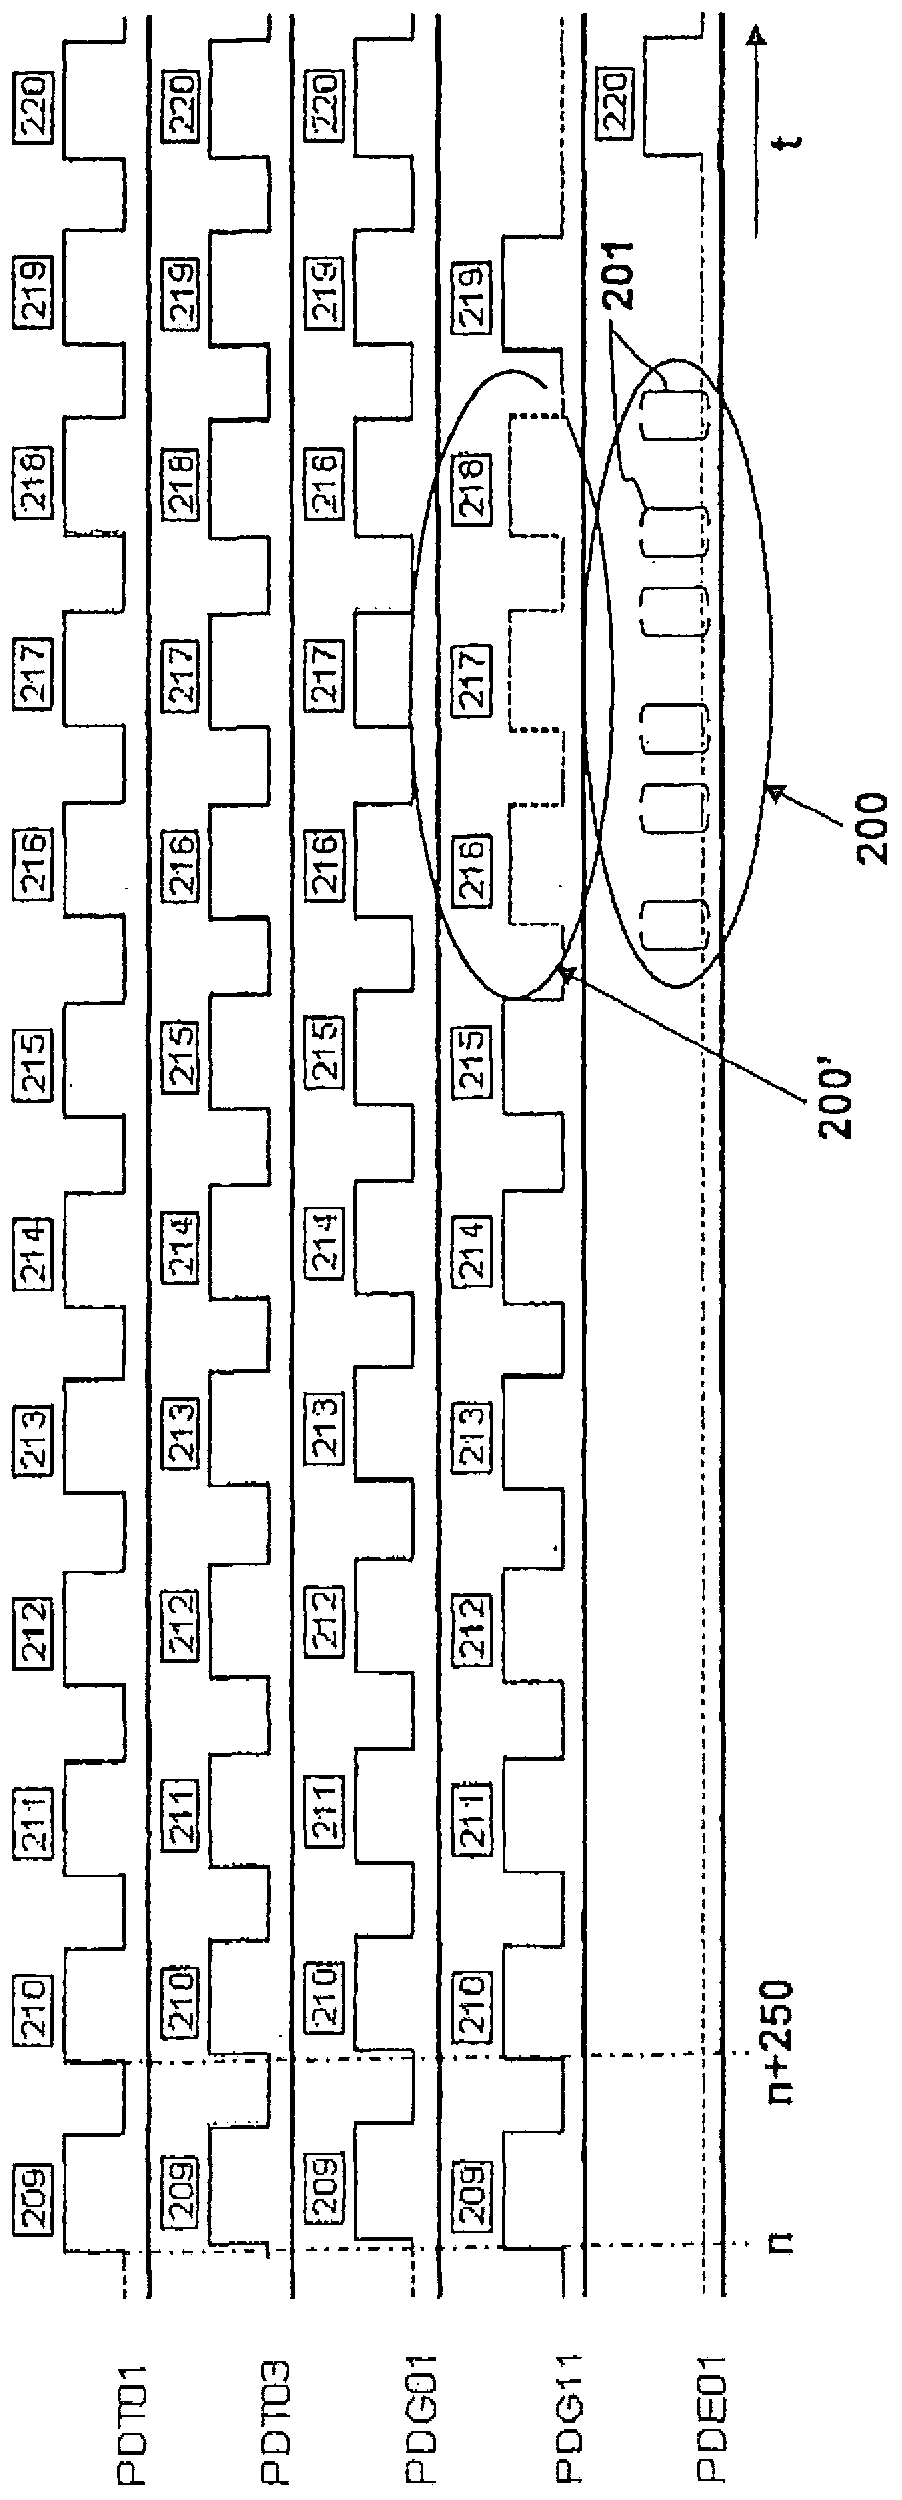 Method for monitoring transport of bank notes